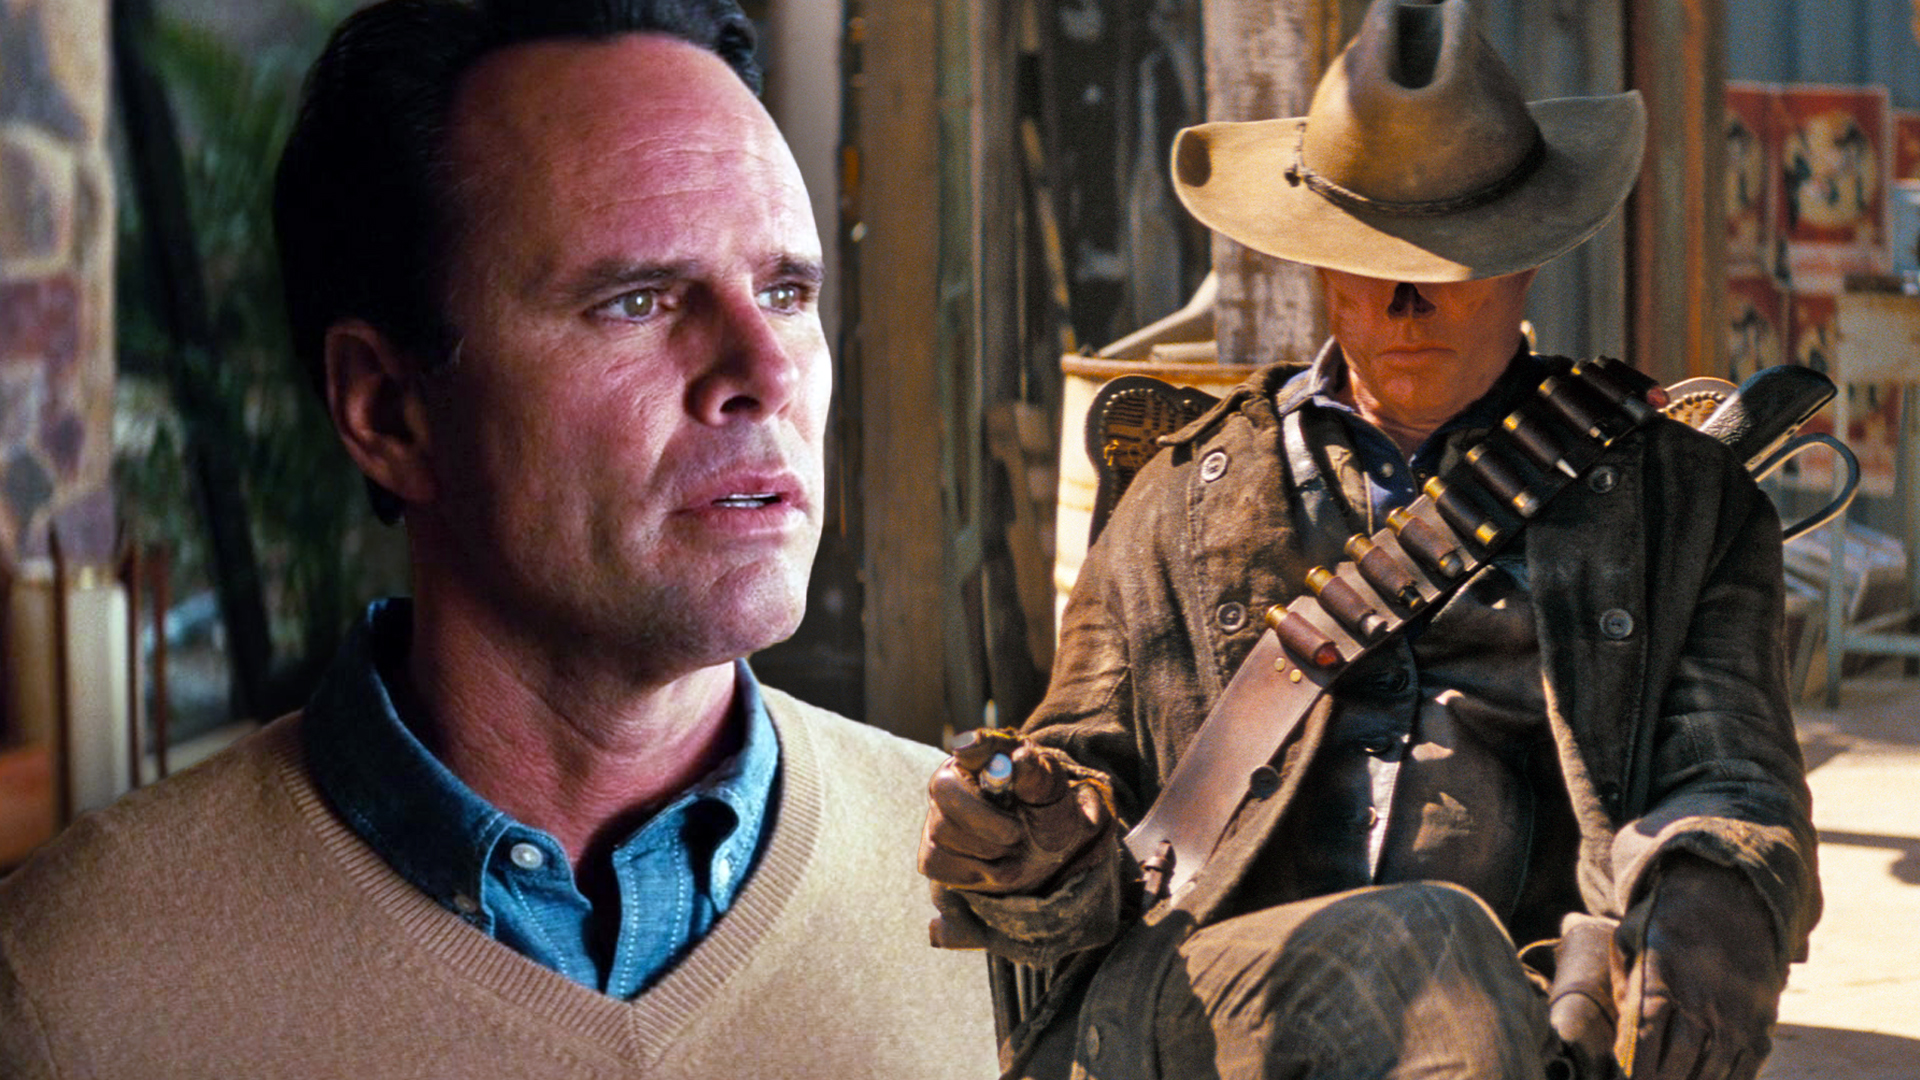 Harrison Ford Surprises Walton Goggins with a Helicopter Ride: A Unique Tale from the 'Cowboys & Aliens' Set